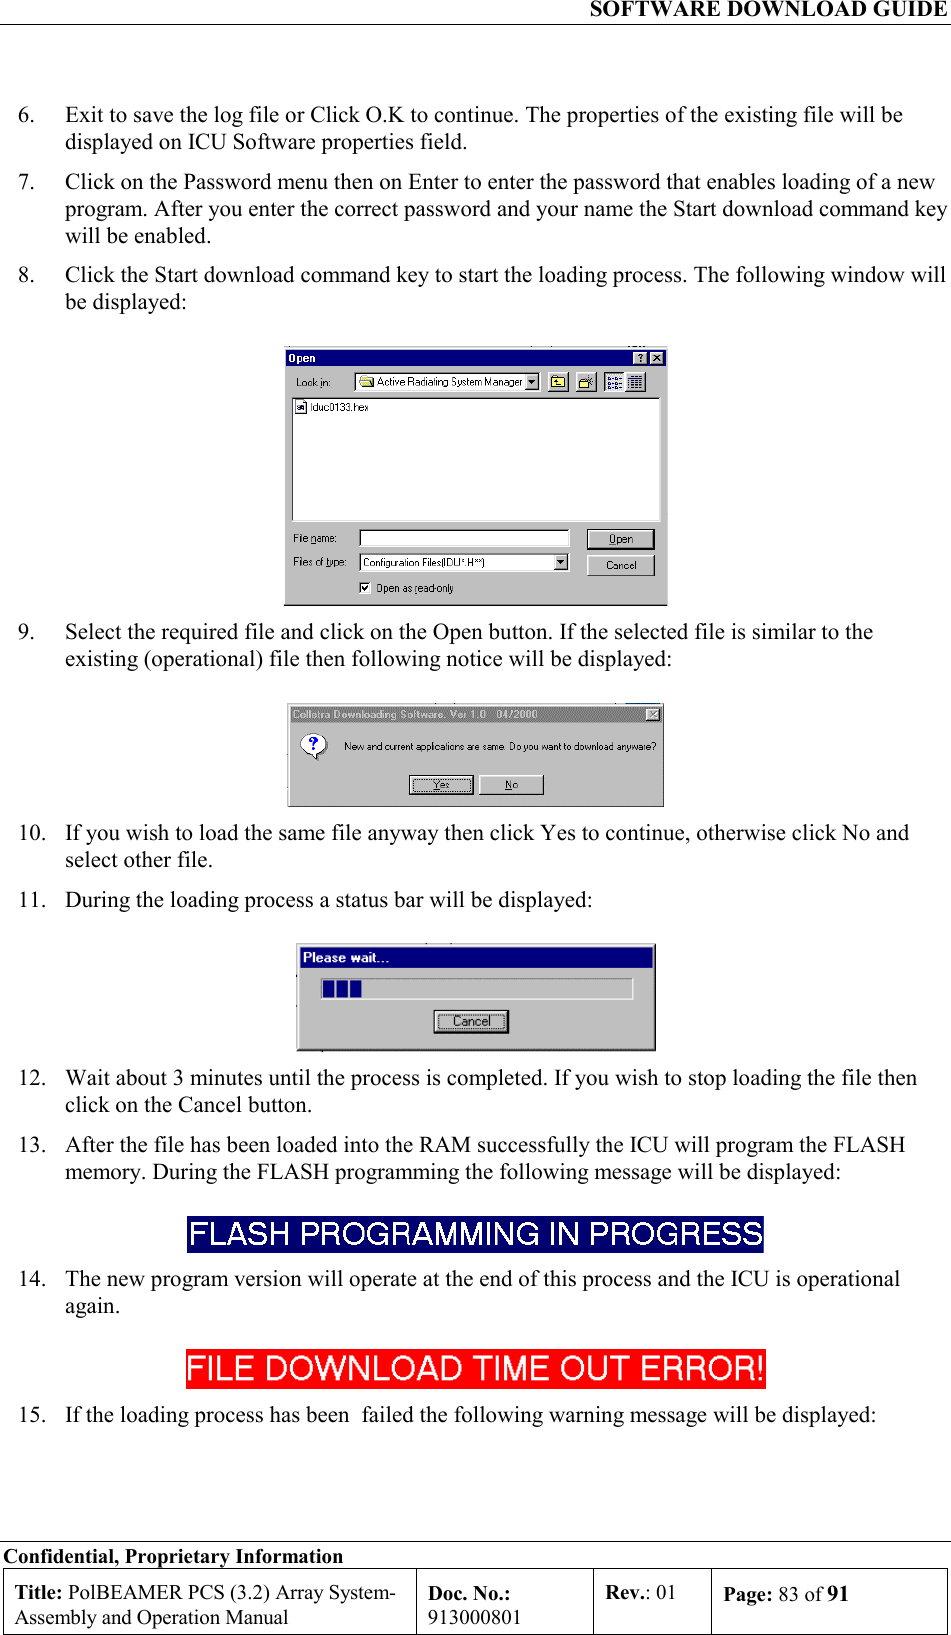   SOFTWARE DOWNLOAD GUIDE Confidential, Proprietary Information Title: PolBEAMER PCS (3.2) Array System- Assembly and Operation Manual Doc. No.: 913000801 Rev.: 01  Page: 83 of 91  6.  Exit to save the log file or Click O.K to continue. The properties of the existing file will be displayed on ICU Software properties field. 7.  Click on the Password menu then on Enter to enter the password that enables loading of a new program. After you enter the correct password and your name the Start download command key will be enabled. 8.  Click the Start download command key to start the loading process. The following window will be displayed:  9.  Select the required file and click on the Open button. If the selected file is similar to the existing (operational) file then following notice will be displayed:  10.  If you wish to load the same file anyway then click Yes to continue, otherwise click No and select other file.  11.  During the loading process a status bar will be displayed:  12.  Wait about 3 minutes until the process is completed. If you wish to stop loading the file then click on the Cancel button. 13.  After the file has been loaded into the RAM successfully the ICU will program the FLASH memory. During the FLASH programming the following message will be displayed:   14.  The new program version will operate at the end of this process and the ICU is operational again.  15.  If the loading process has been  failed the following warning message will be displayed: 